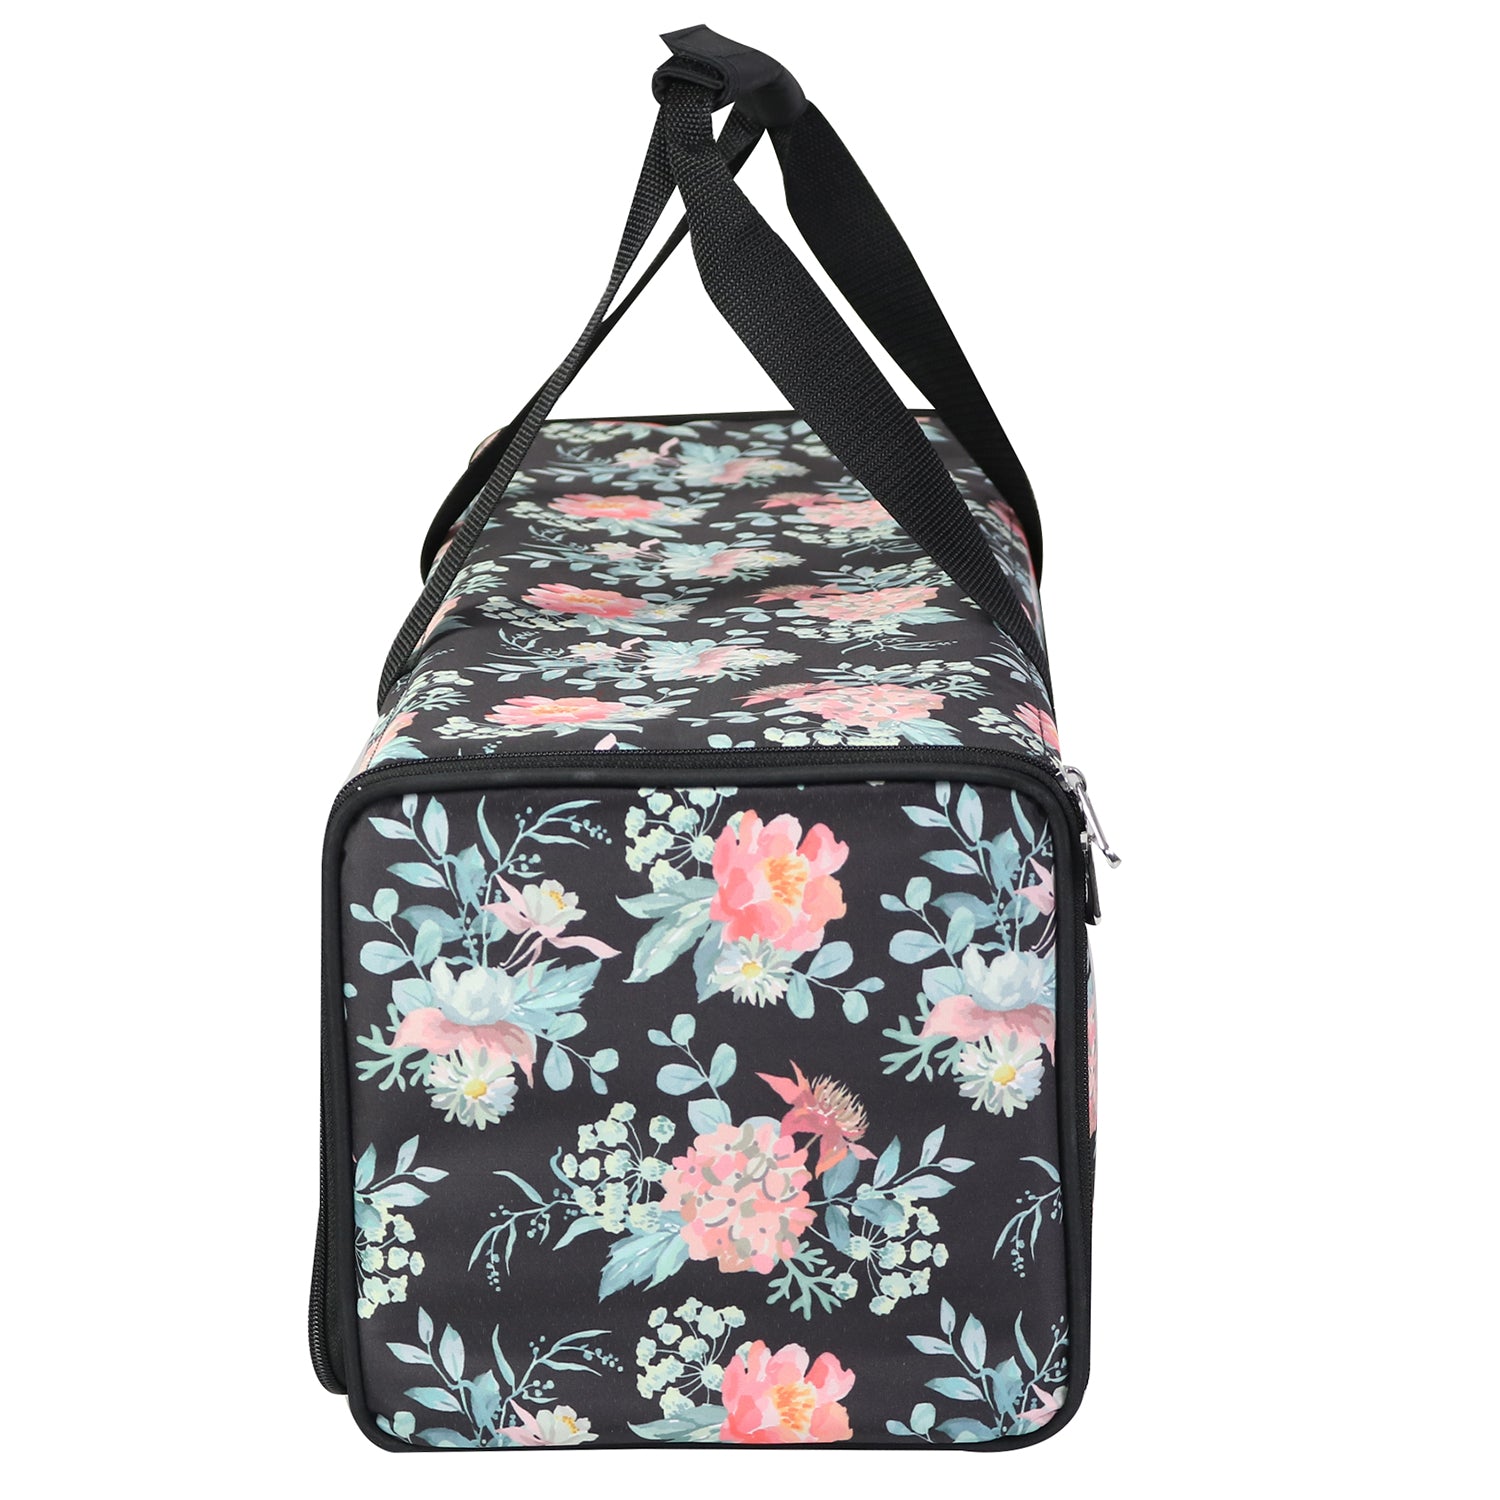 Everything Mary Die-Cut Machine Carrying Case, Floral Print - Craft Sticker  Bag Compatible with Cricut Air/Maker & Brother ScanNCut - Cutting Storage